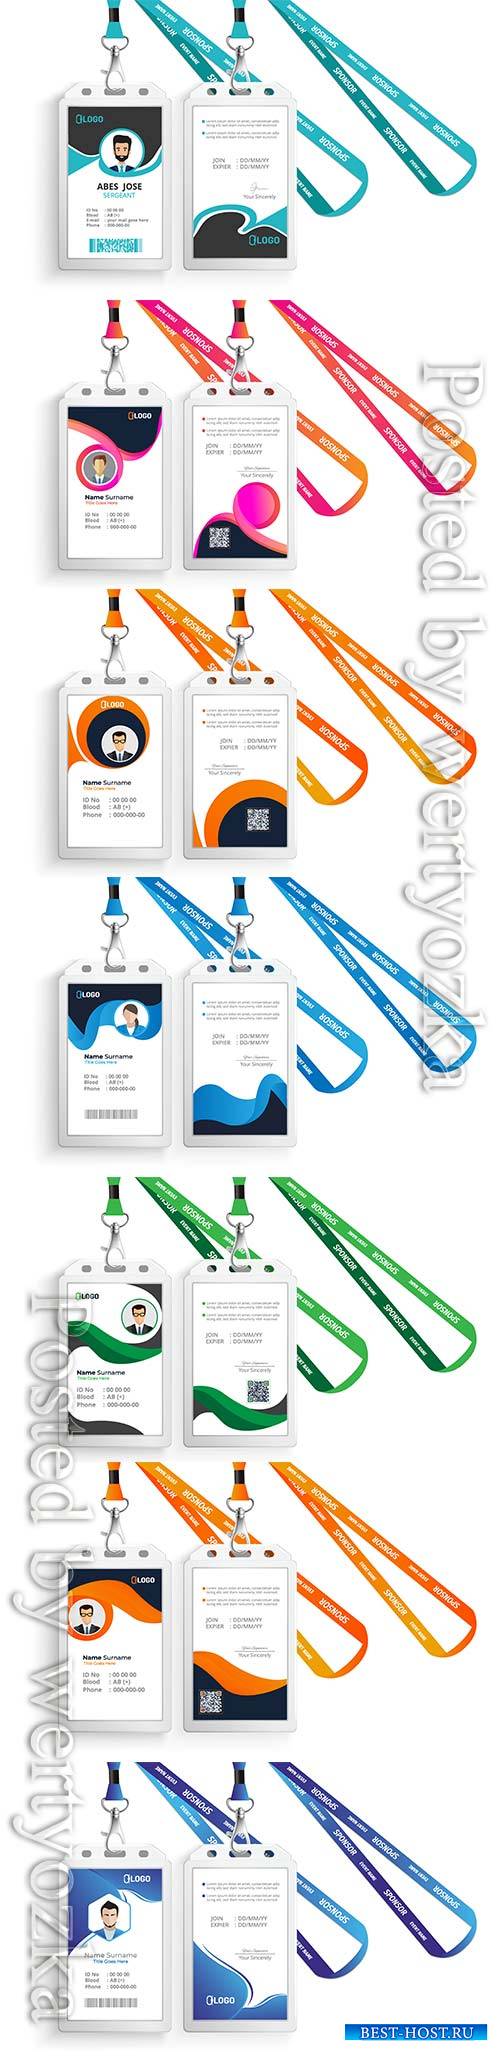 Id card with lanyard design set isolated vector illustration